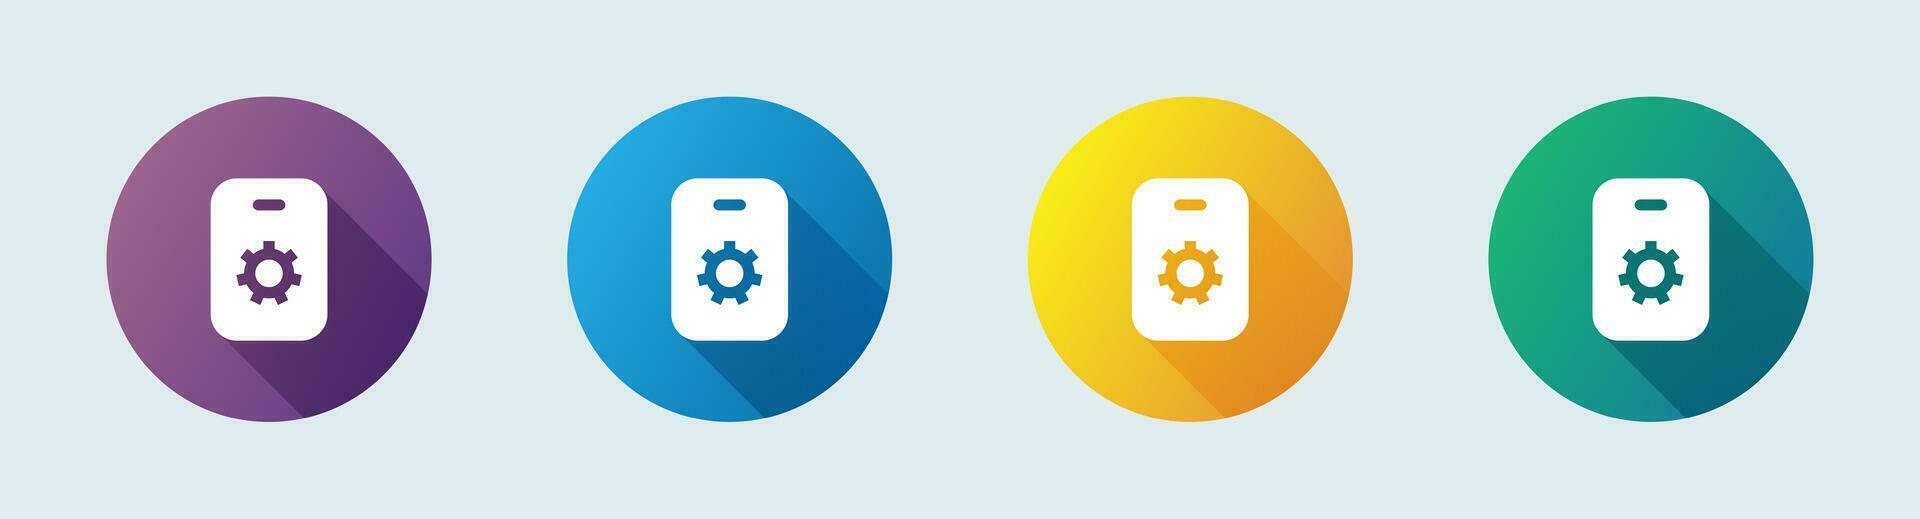 Cogwheel solid icon in flat design style. Update system signs vector illustration.